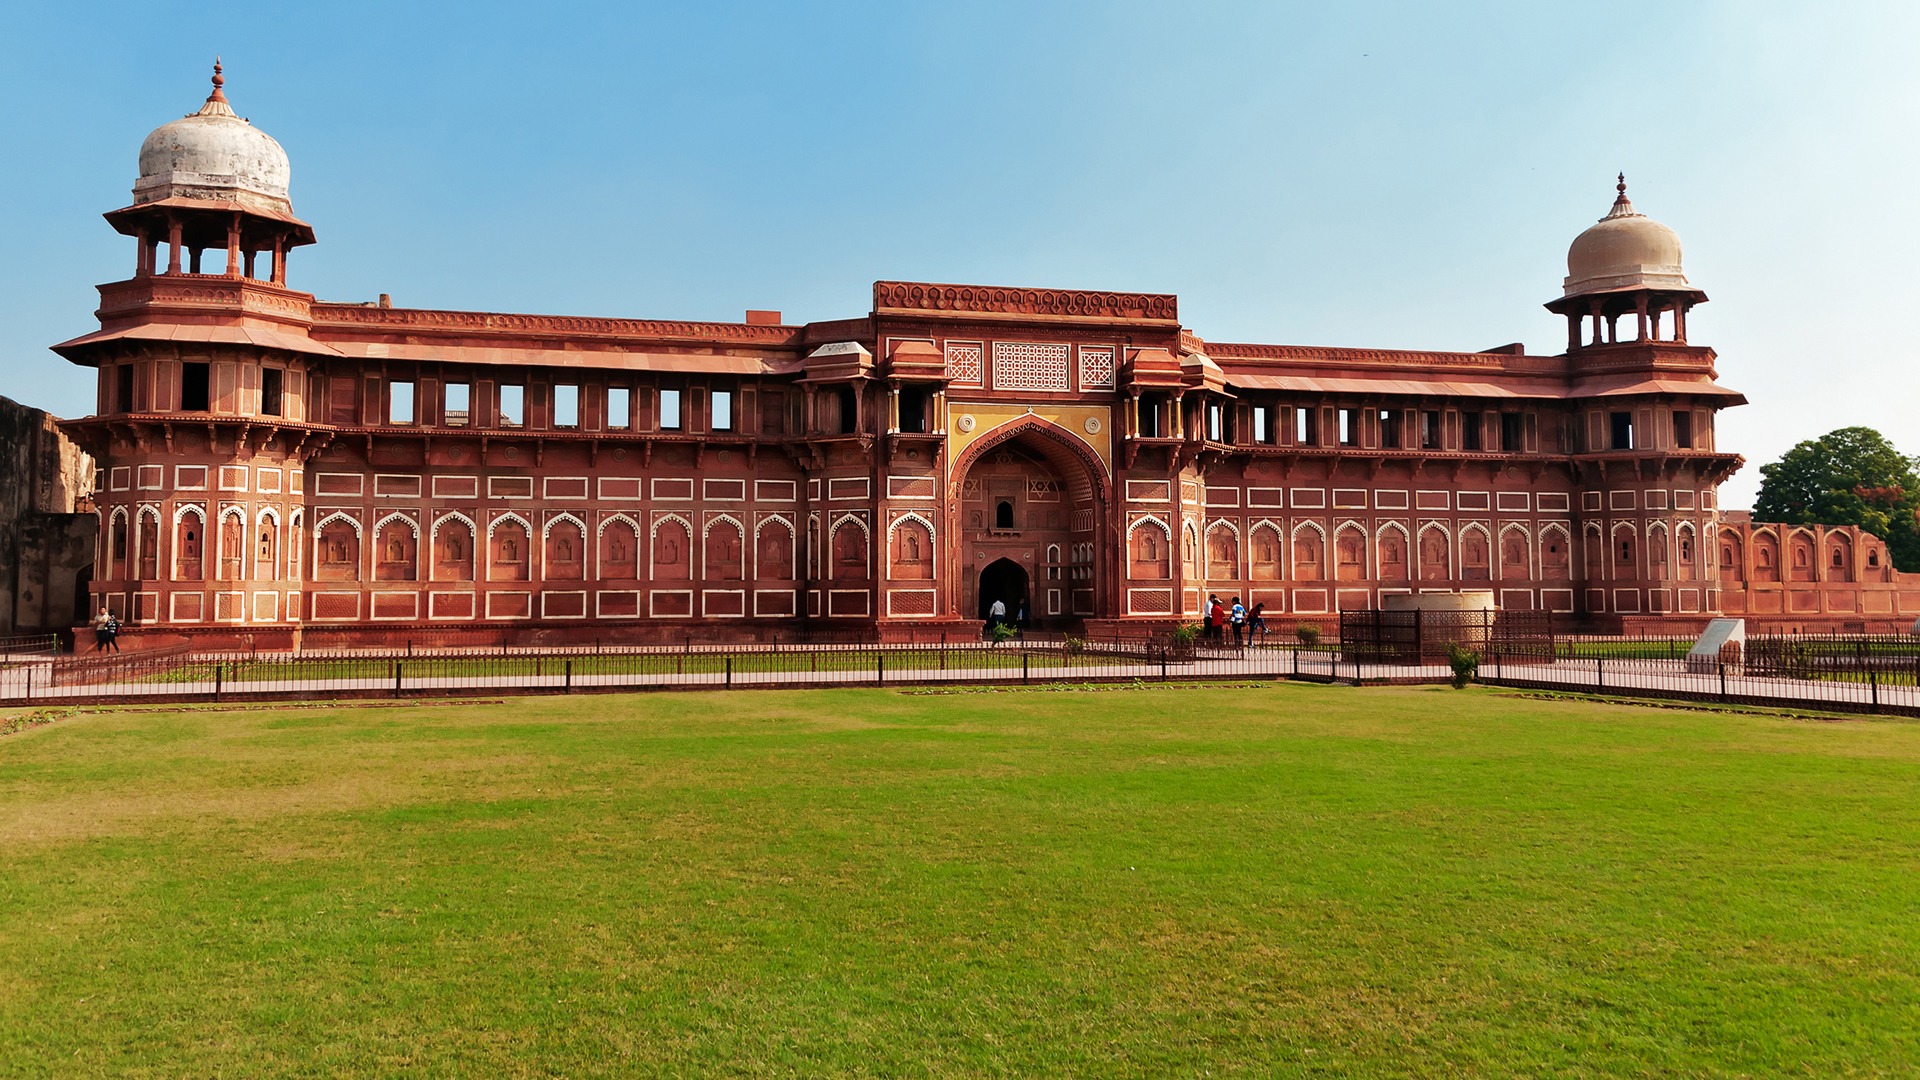 Explore the Agra Fort. A UNESCO World Heritage Site